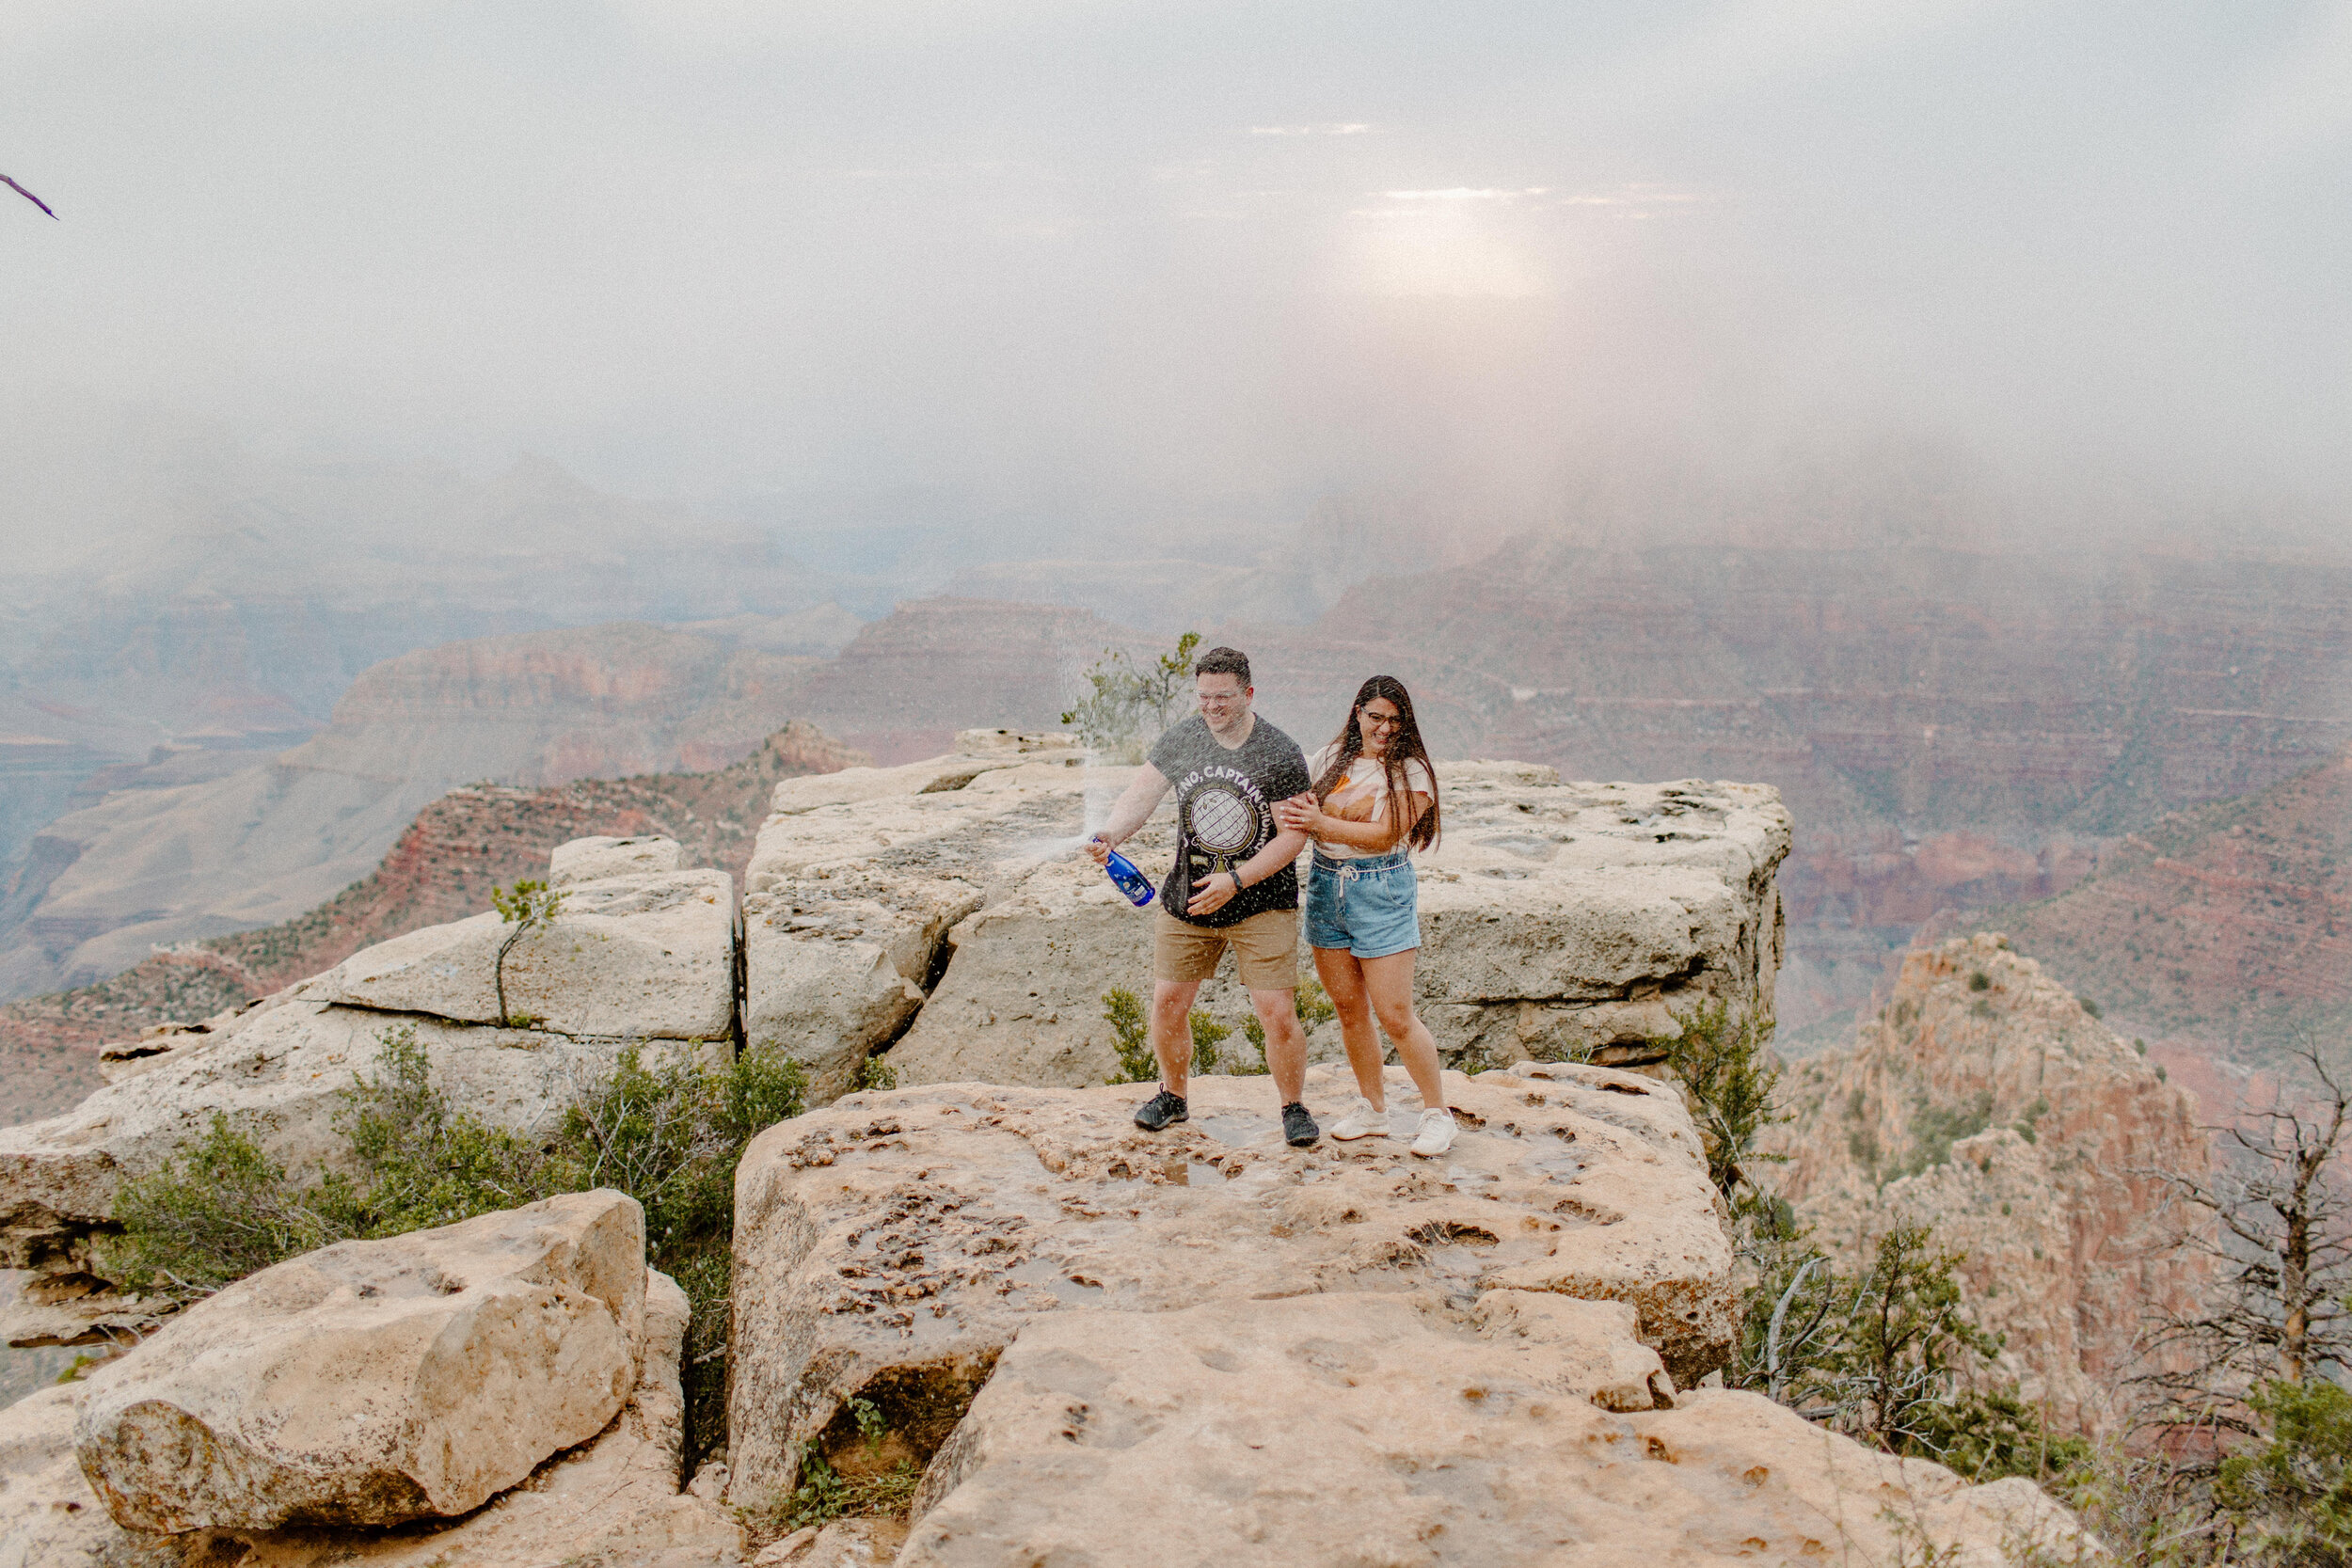  Surprise proposal at sunrise at the Grand Canyon South Rim, man and woman celebrate their new proposal by spraying a bottle of champagne while standing on the rim of the canyon. Grand Canyon engagement, Lucy B. Photography. 